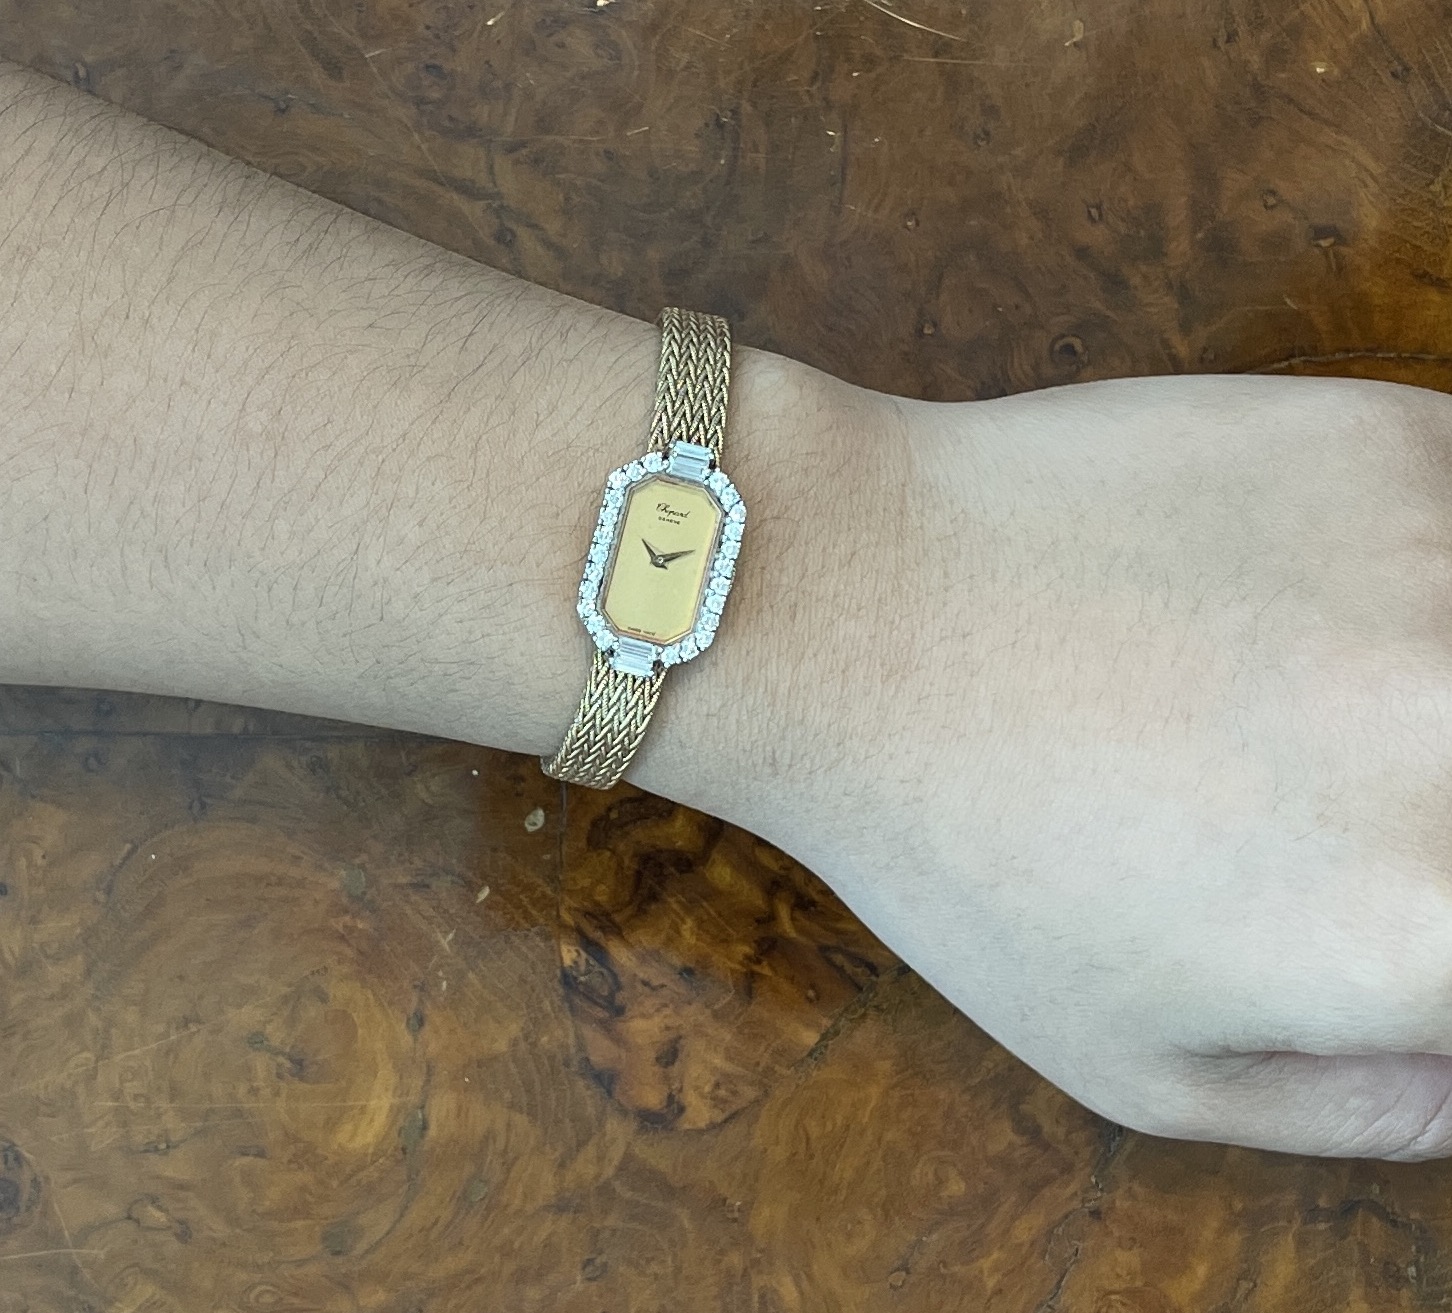 A CHOPARD LADIES GOLD AND DIAMOND COCKTAIL WATCH - Image 4 of 4